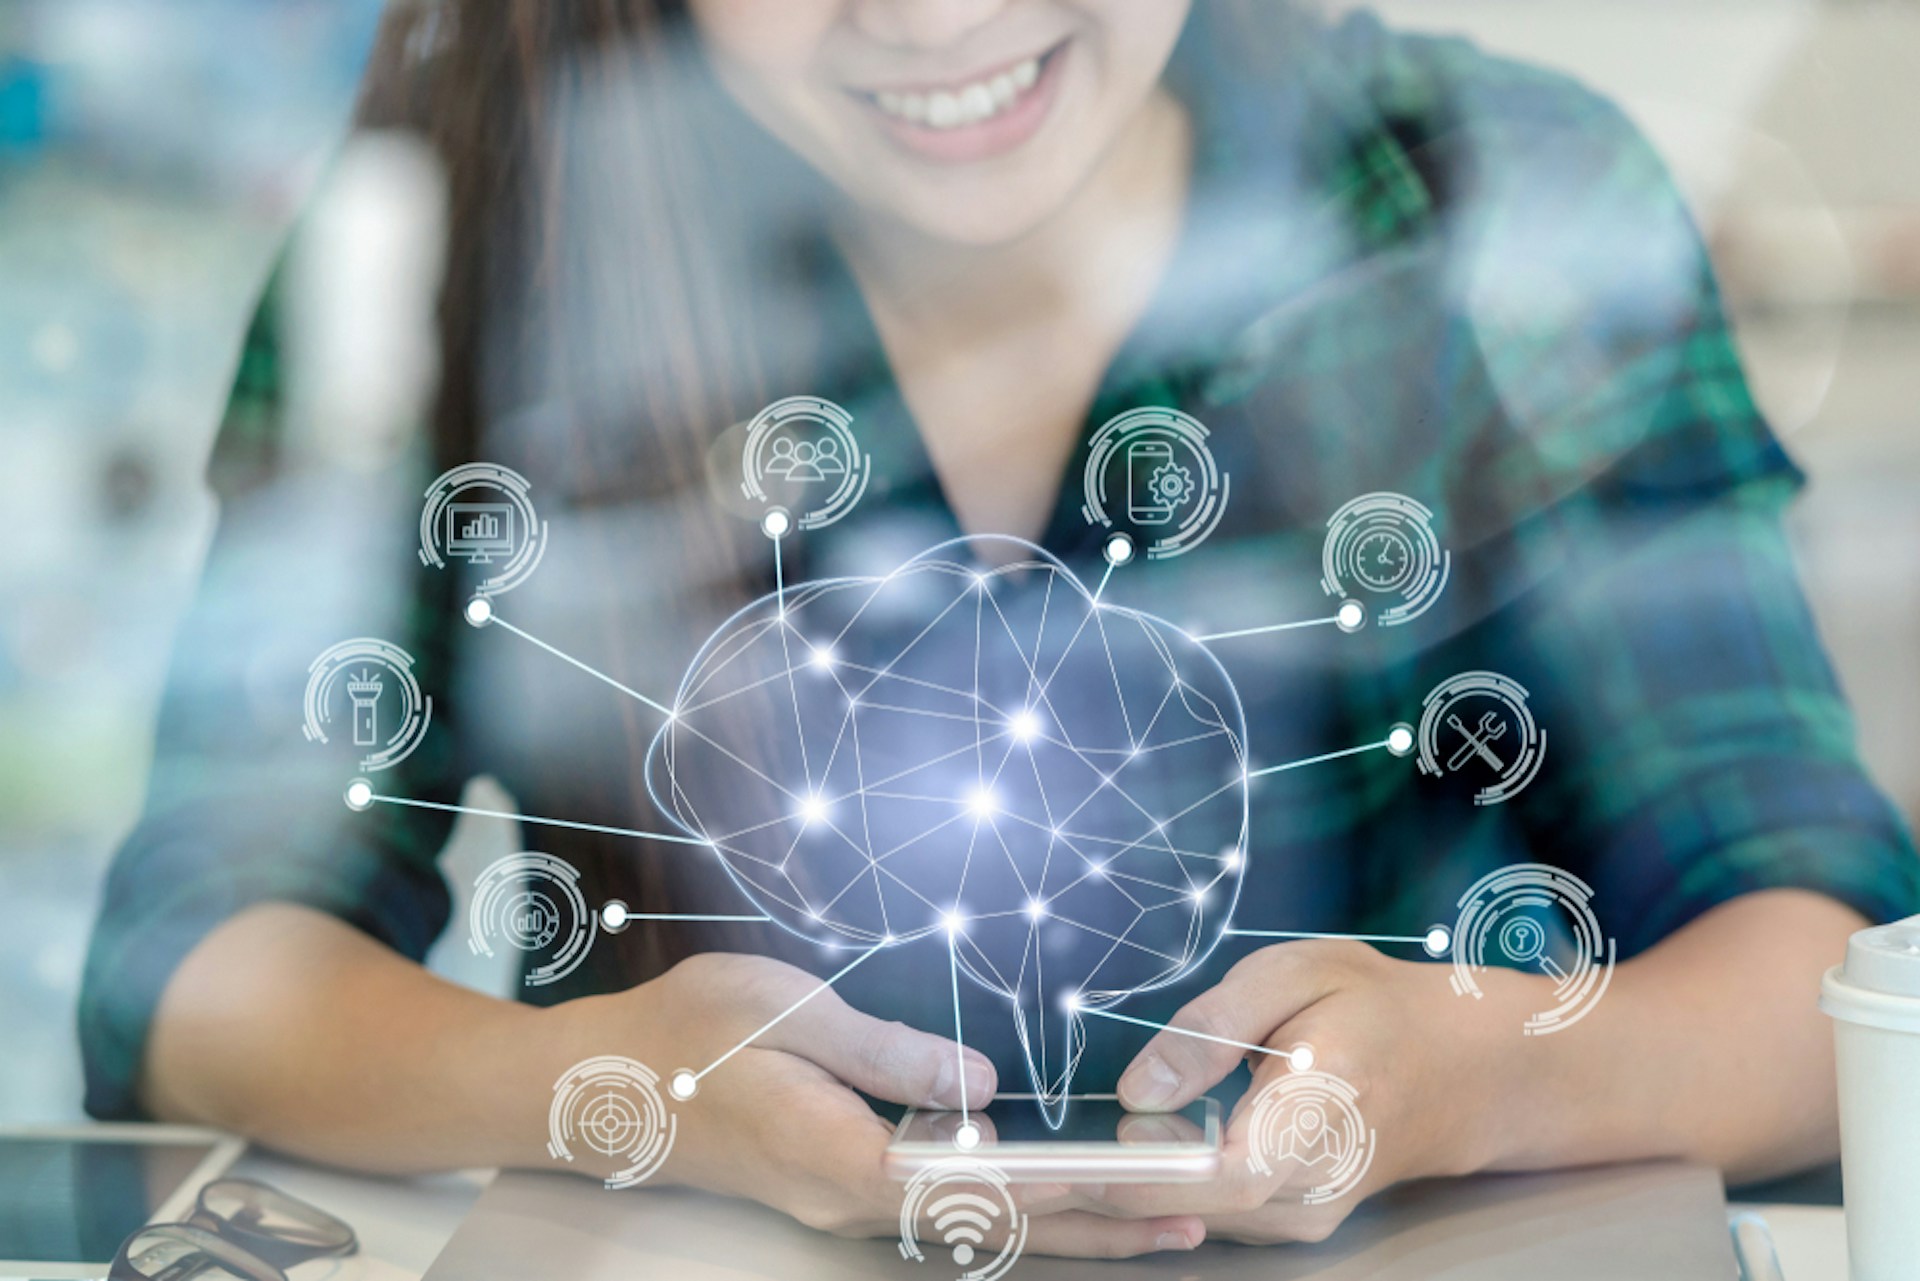 A data line illustration in the shape of a brain with technological icons against an image of a woman using her smartphone